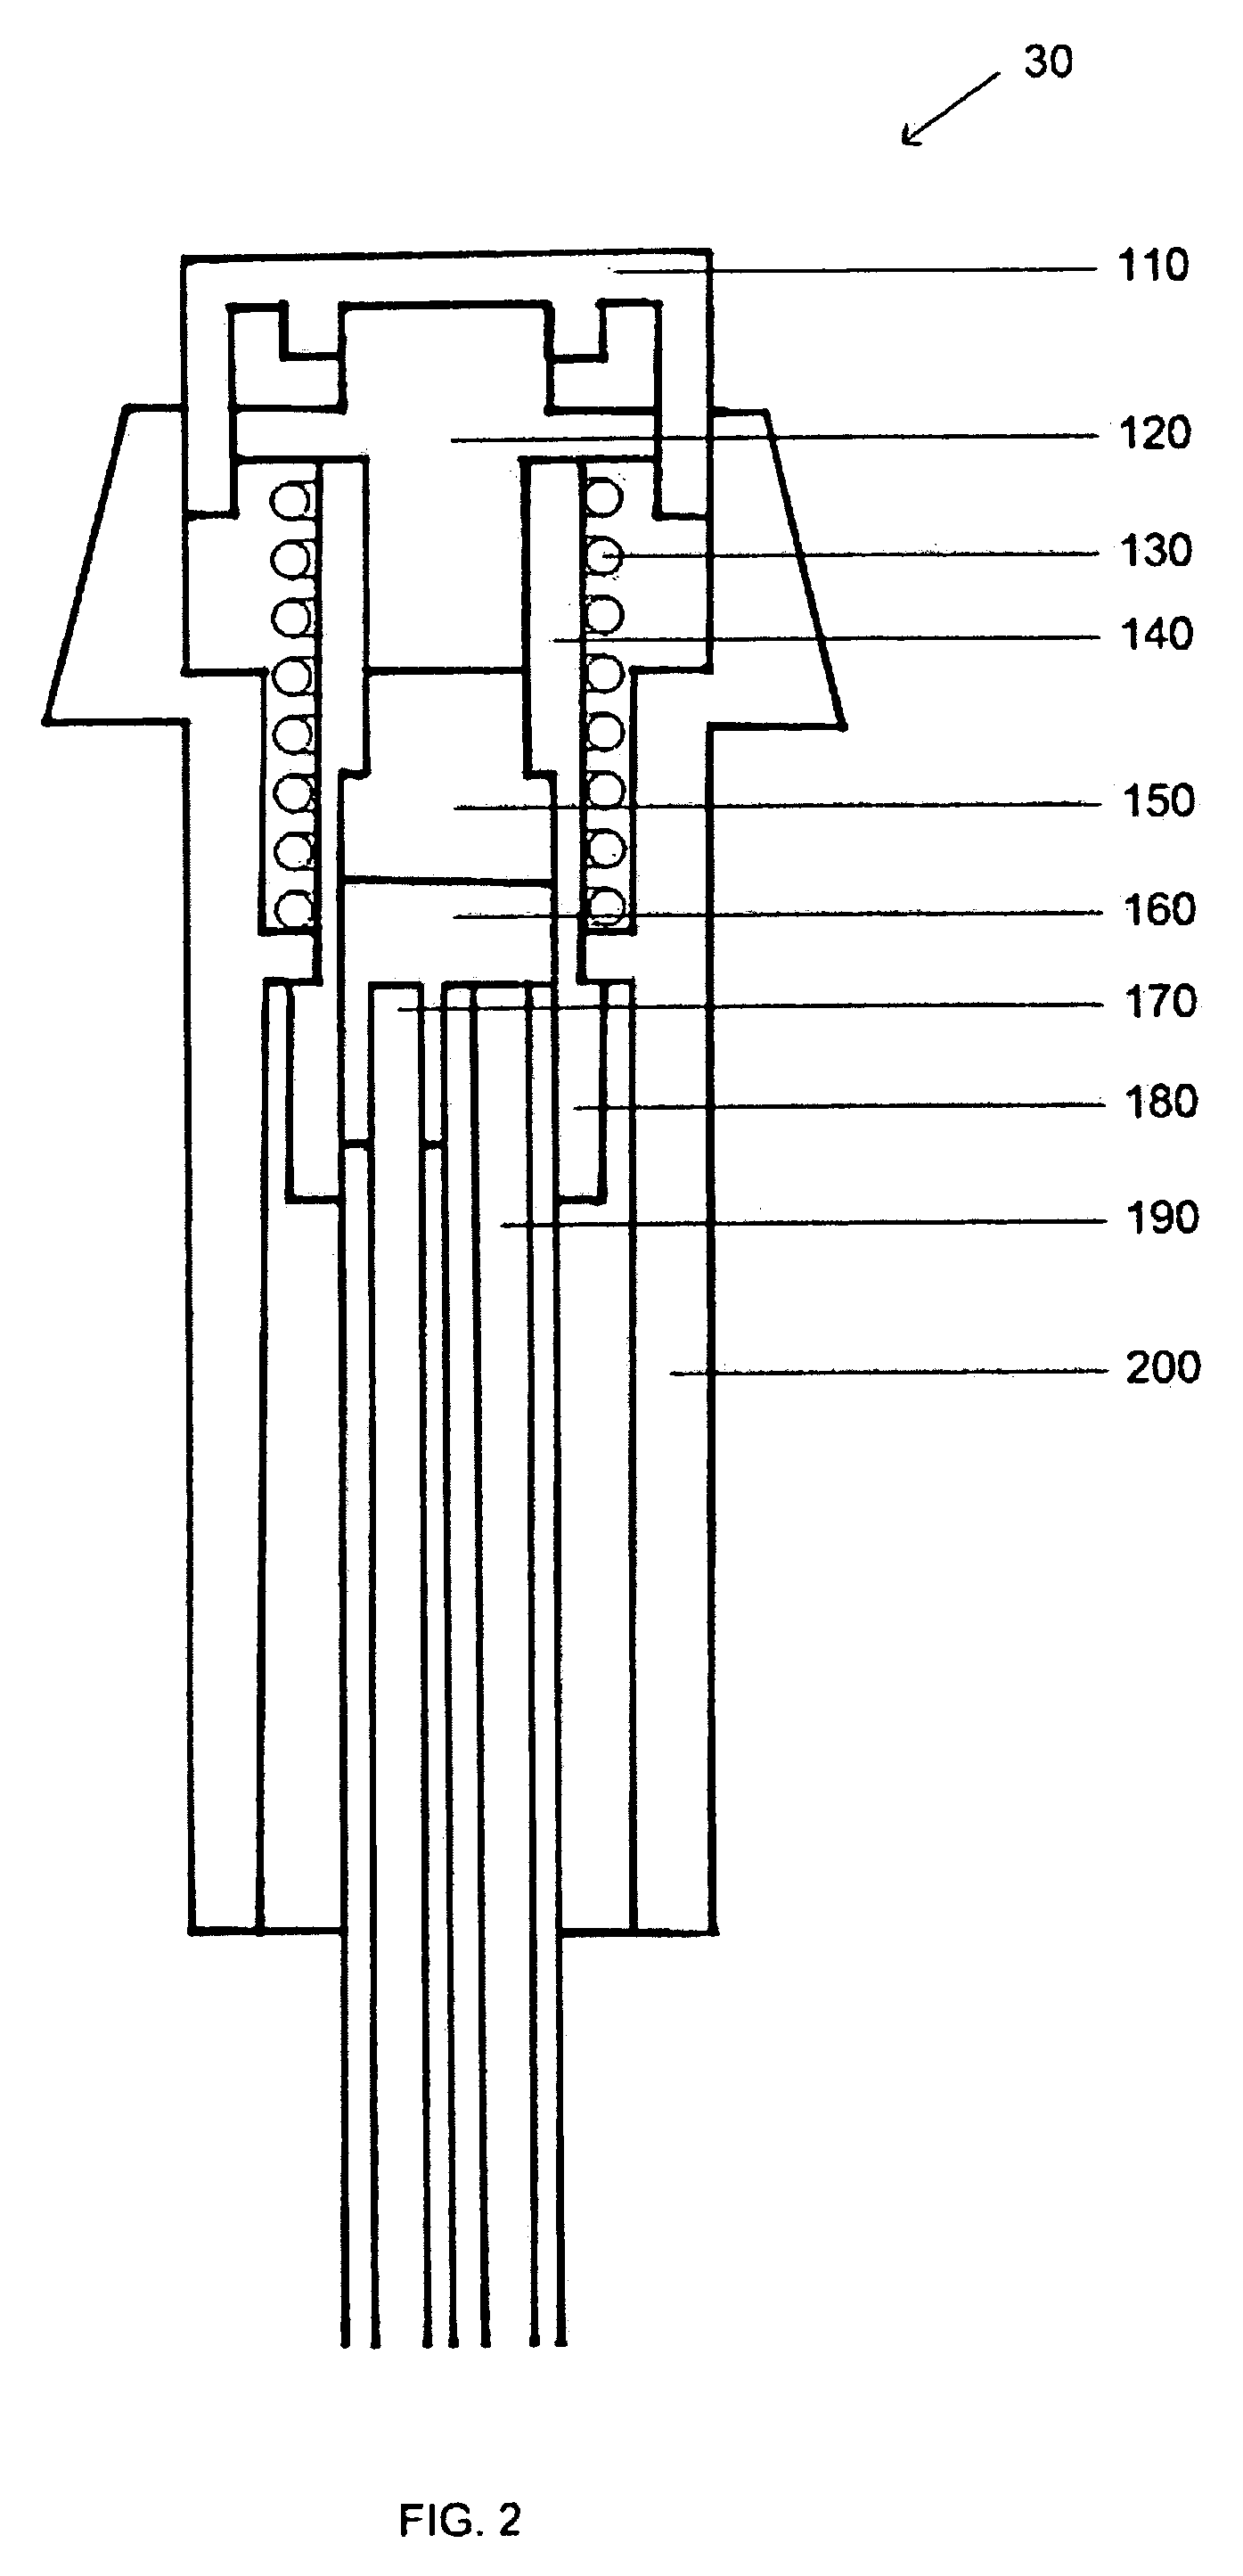 Nonmetallic input device for magnetic imaging and other magnetic field applications